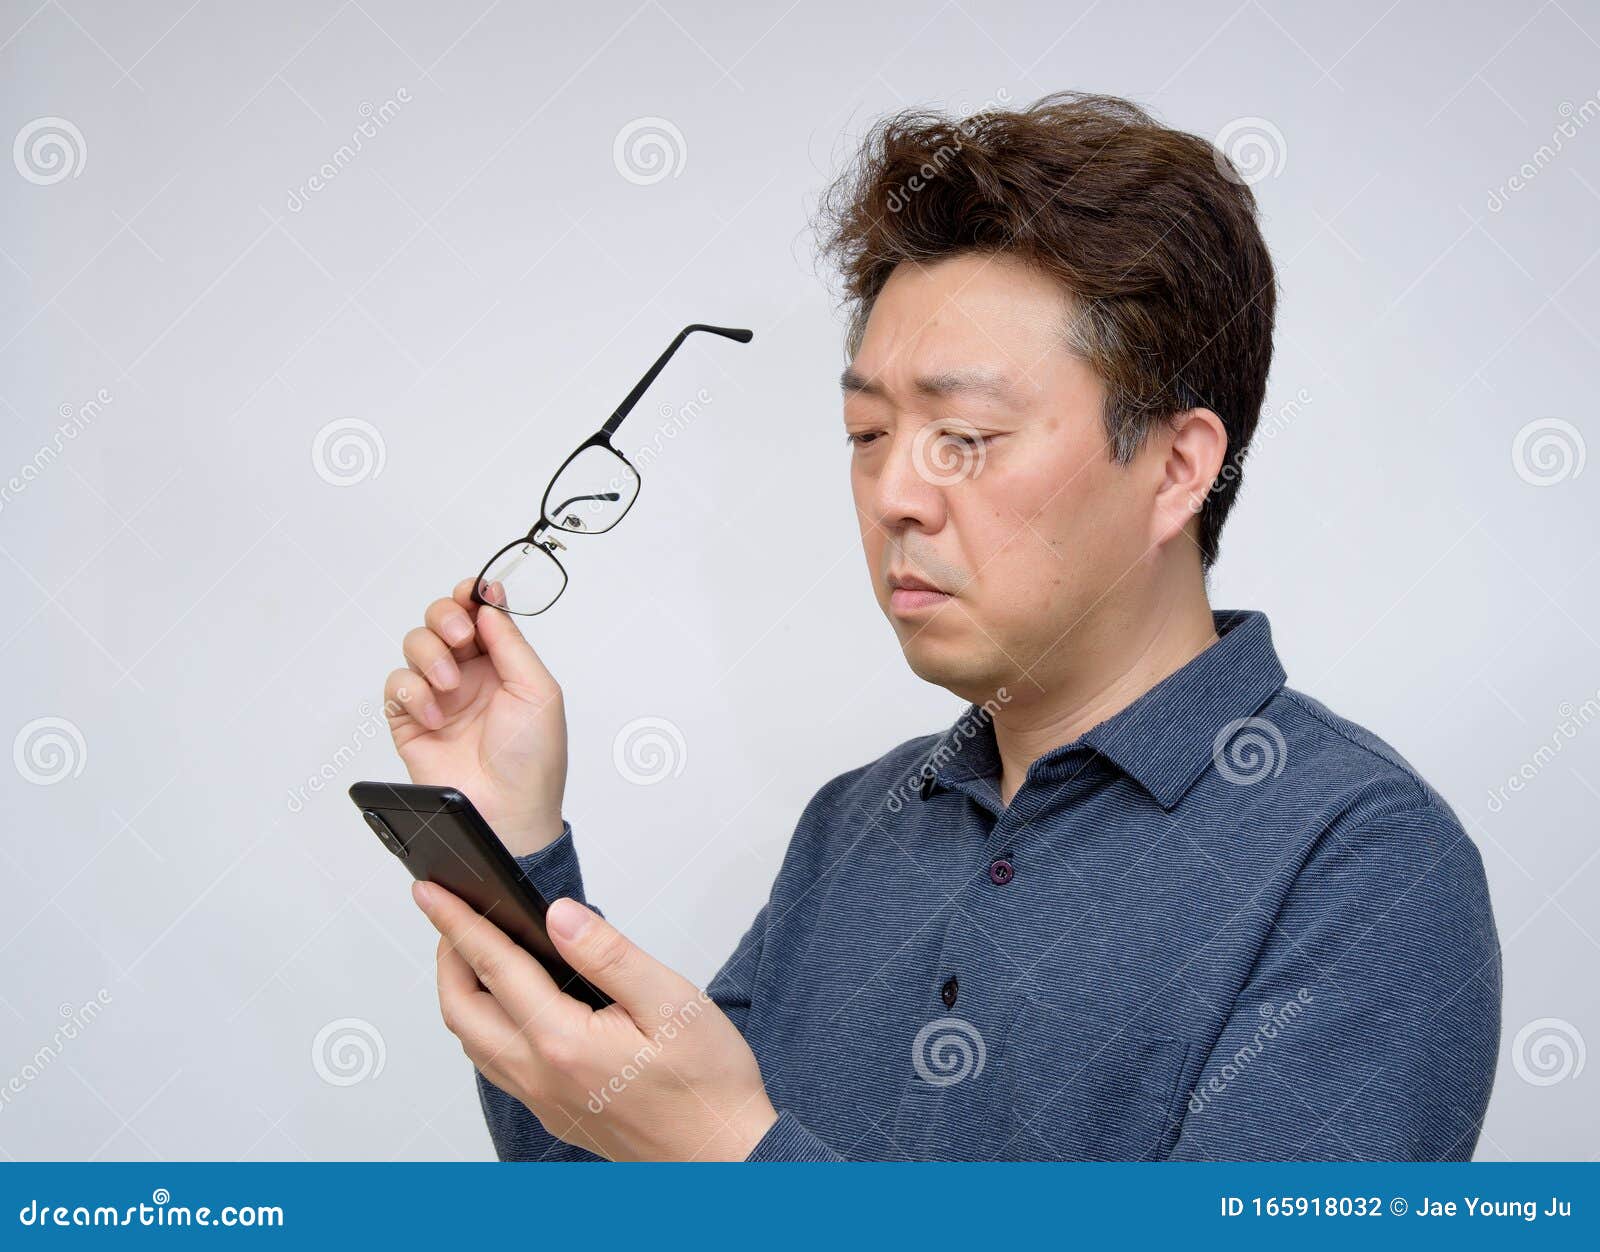 asian male trying to read something on his mobile phone. poor sight, presbyopia, myopia